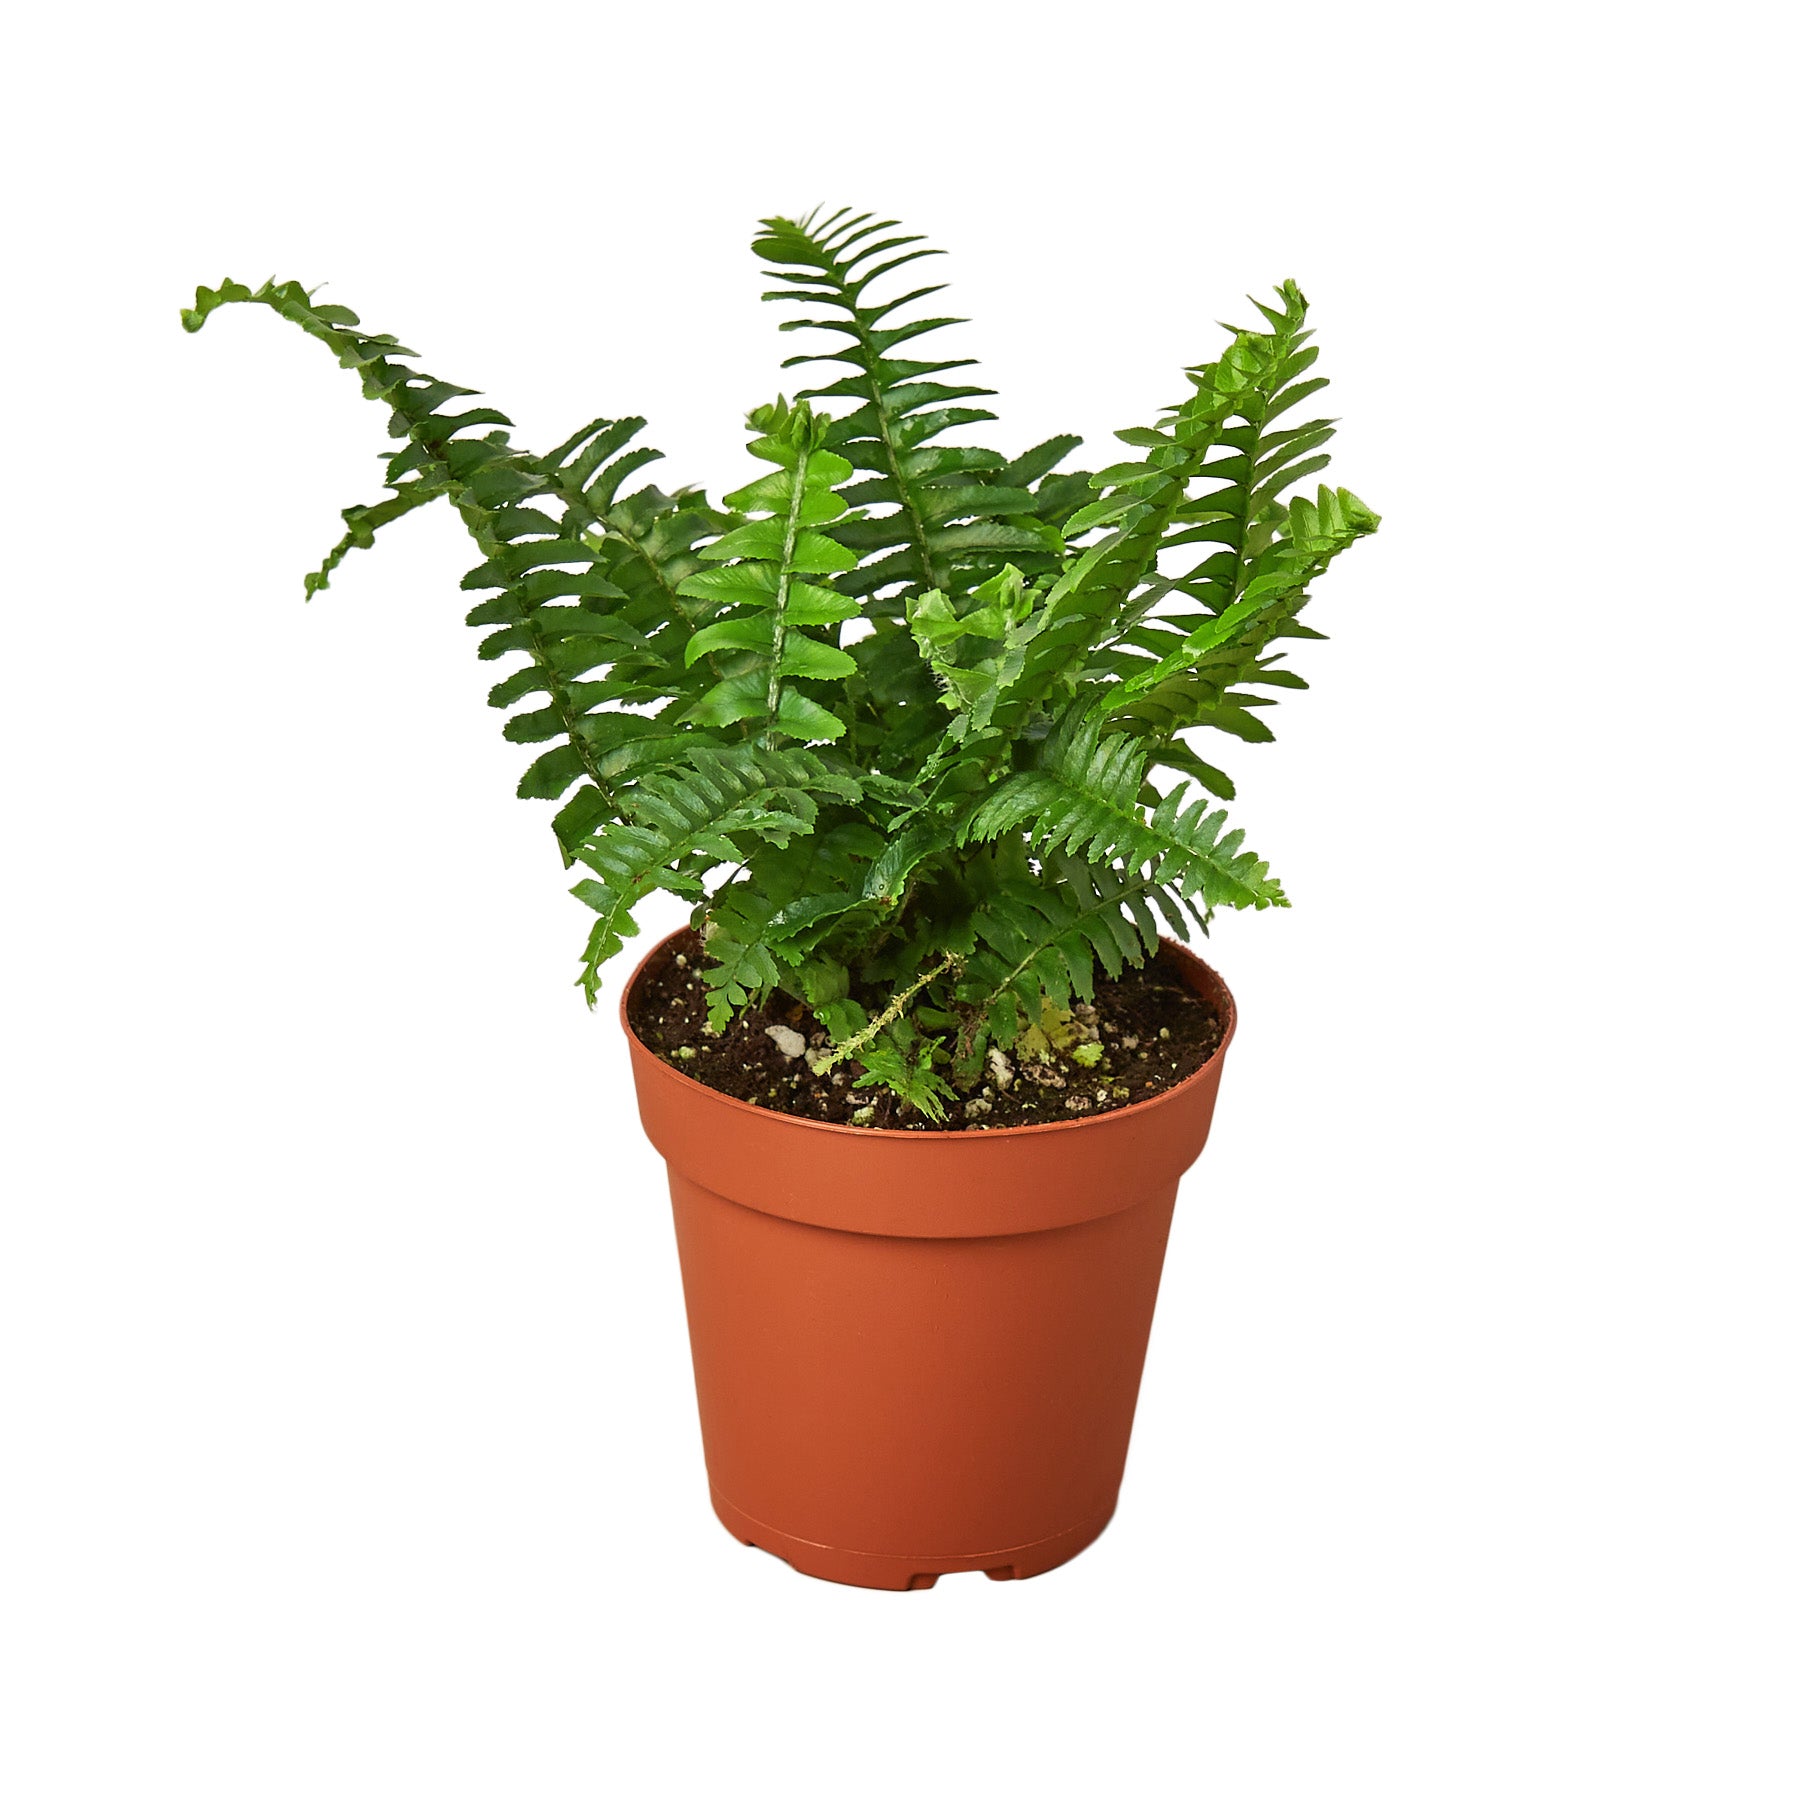 A fern plant in a pot on a white background that can be found at the best garden nursery near me.